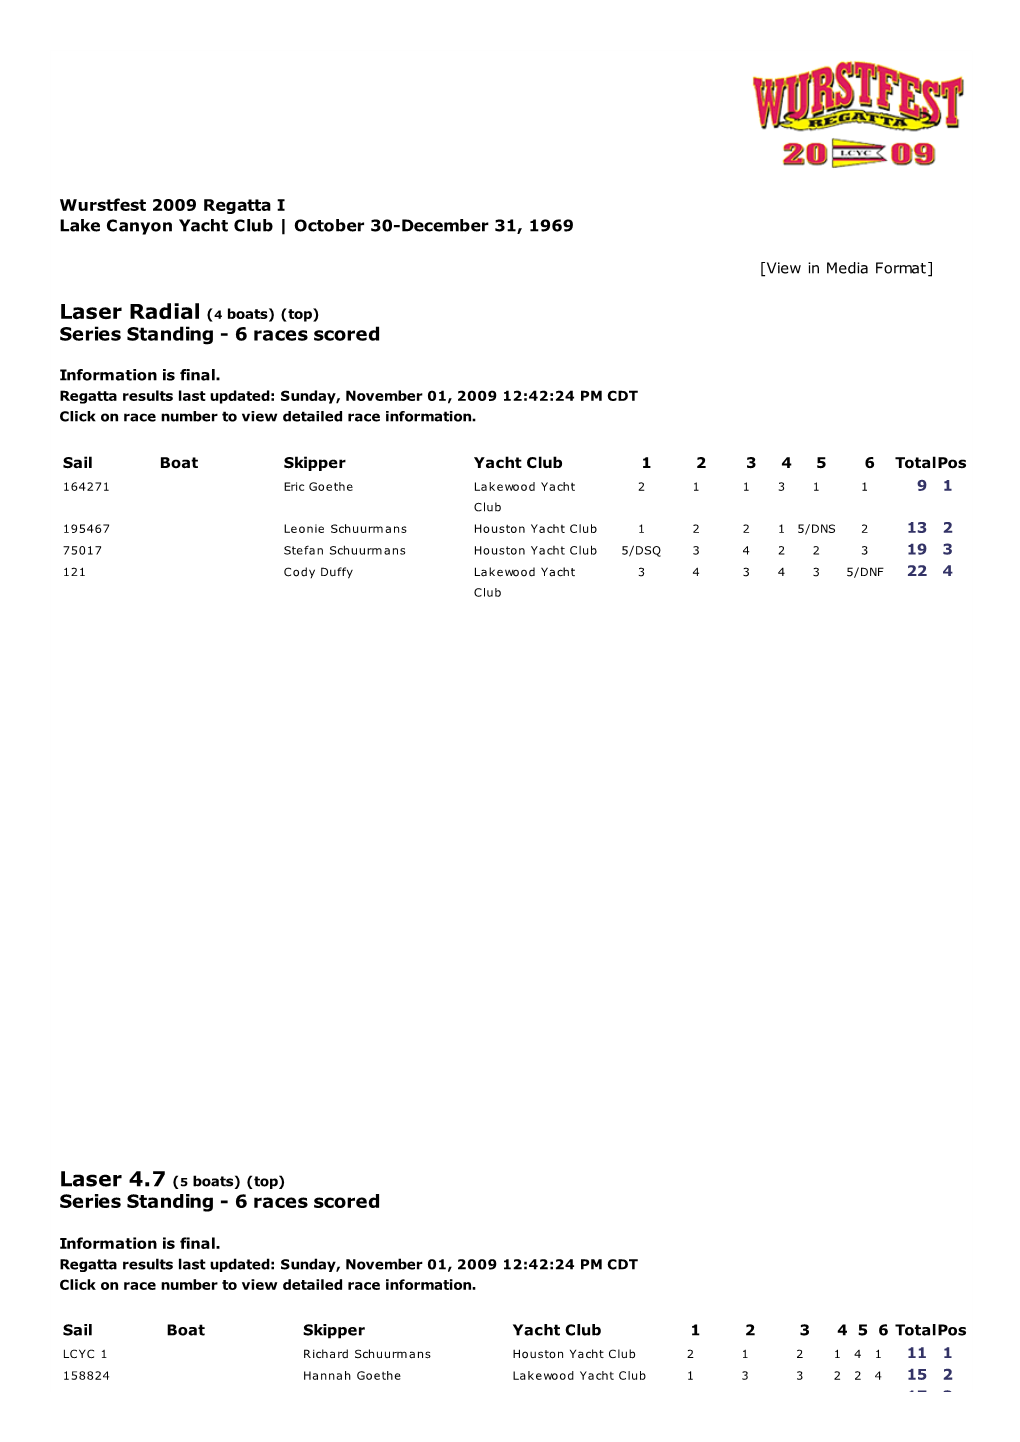 Laser Radial (4 Boats) (Top) Series Standing - 6 Races Scored